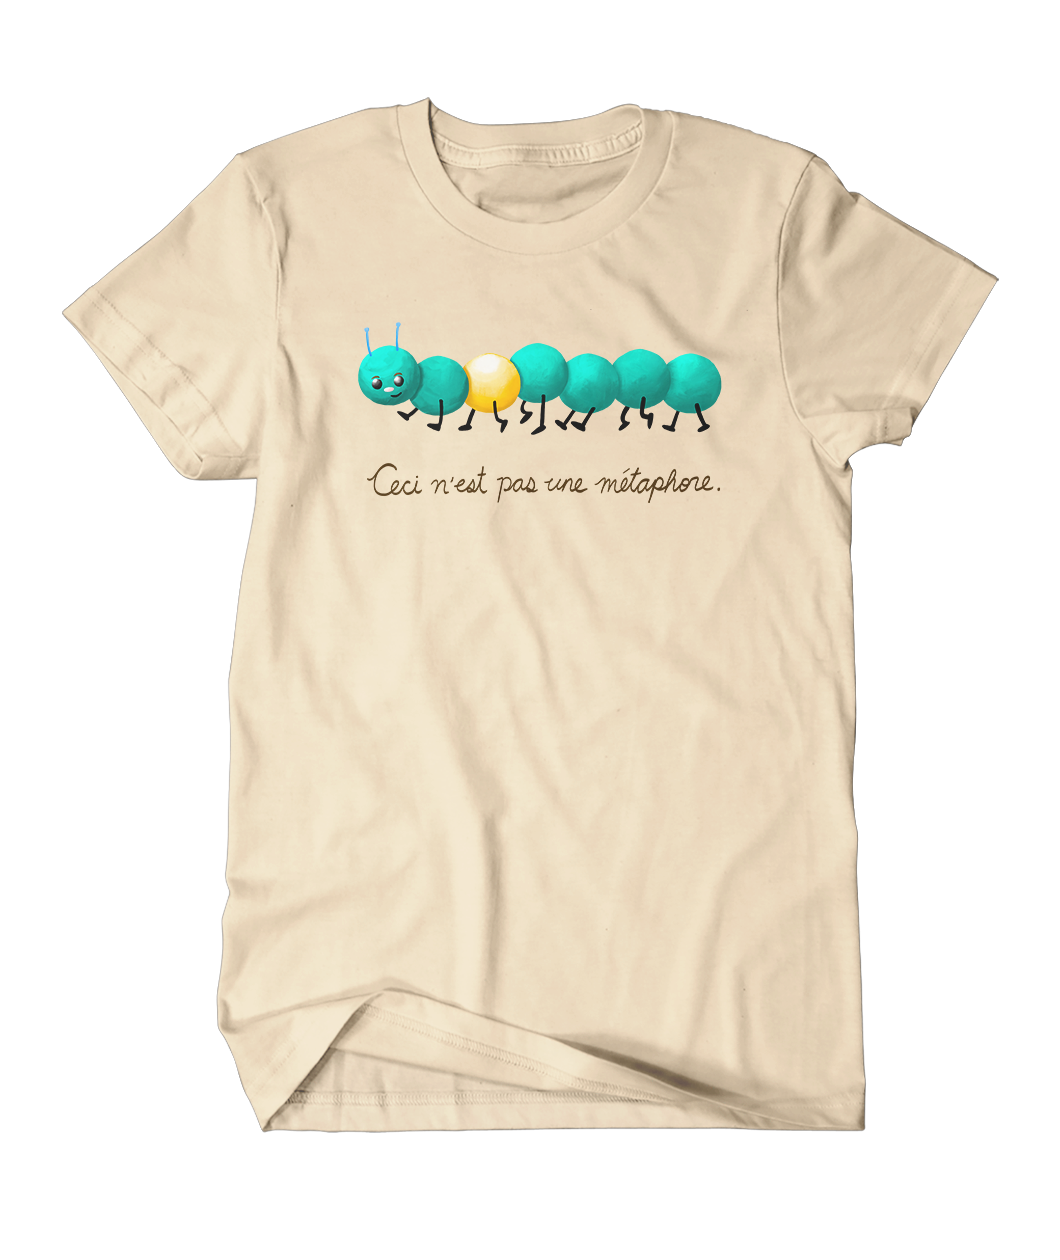 A beige t-shirt with a teal caterpillar - its body made up of teal balls with one yellow ball. Has a smile on its face, antennas and two little feet on each section. Cursive font below reads 